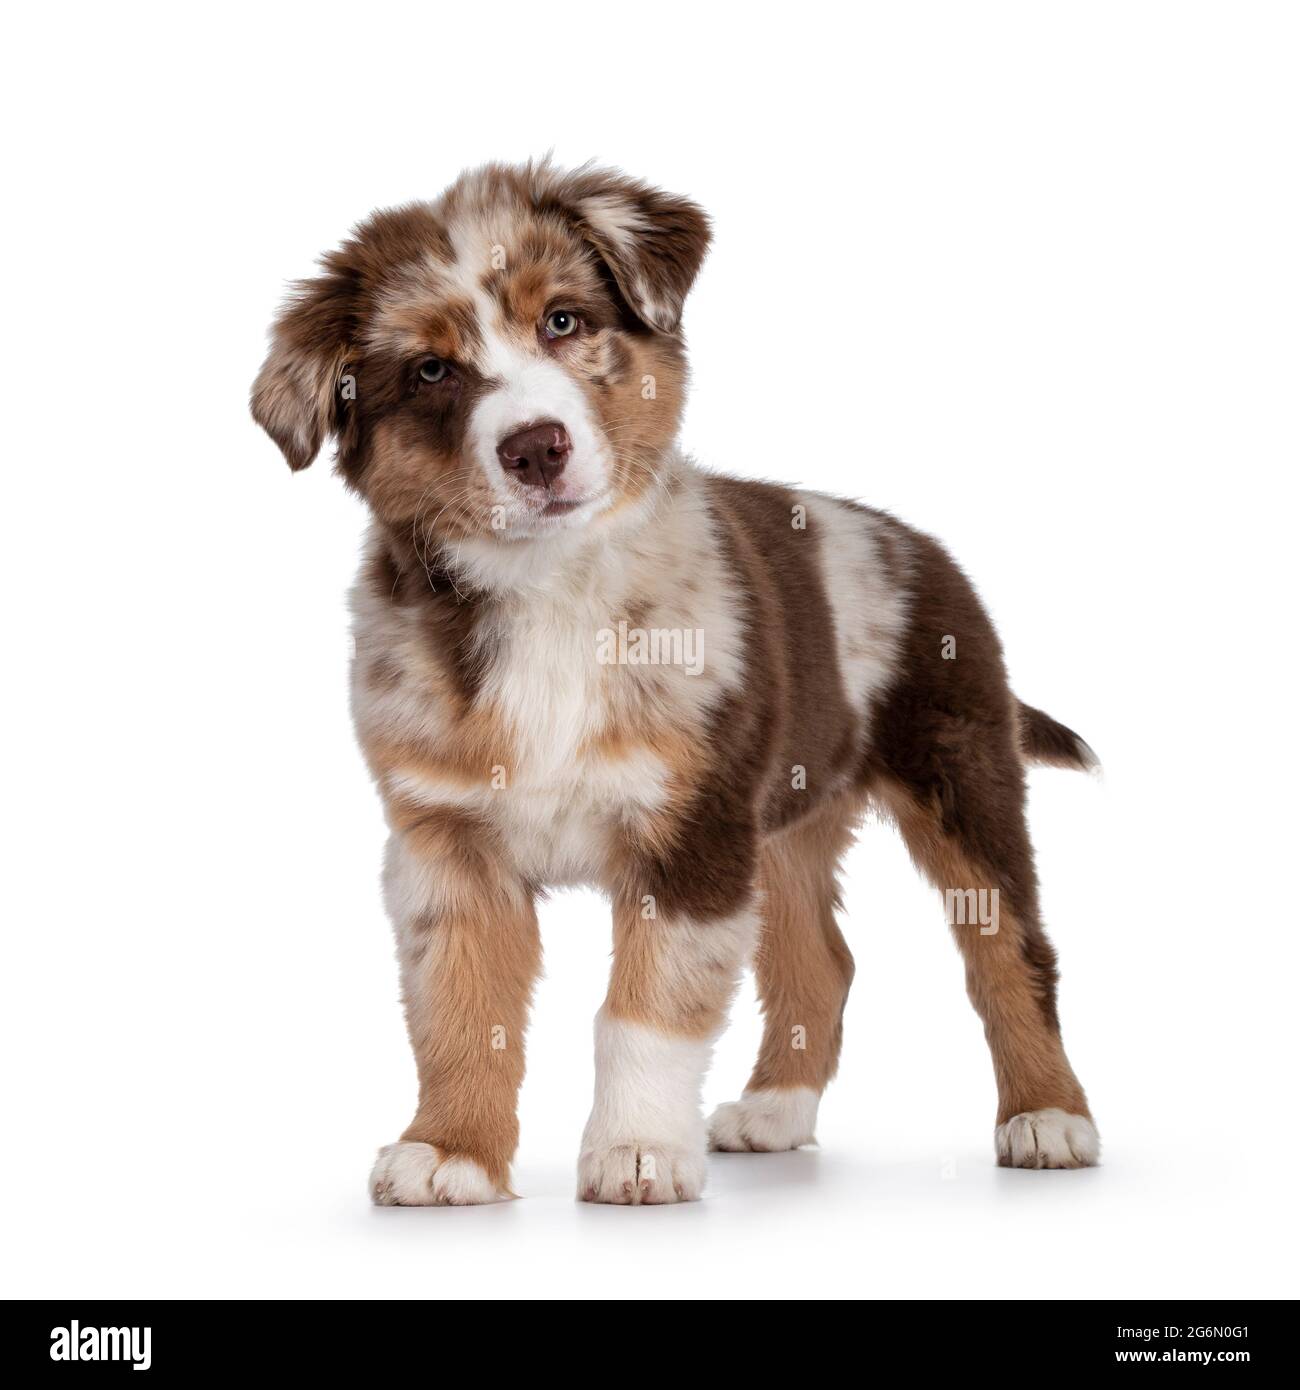 finansiel selvmord Fearless Cute red merle white with tan Australian Shepherd aka Aussie dog pup,  standing facing front. Looking towards camera with cute head tilt, mouth  closed Stock Photo - Alamy